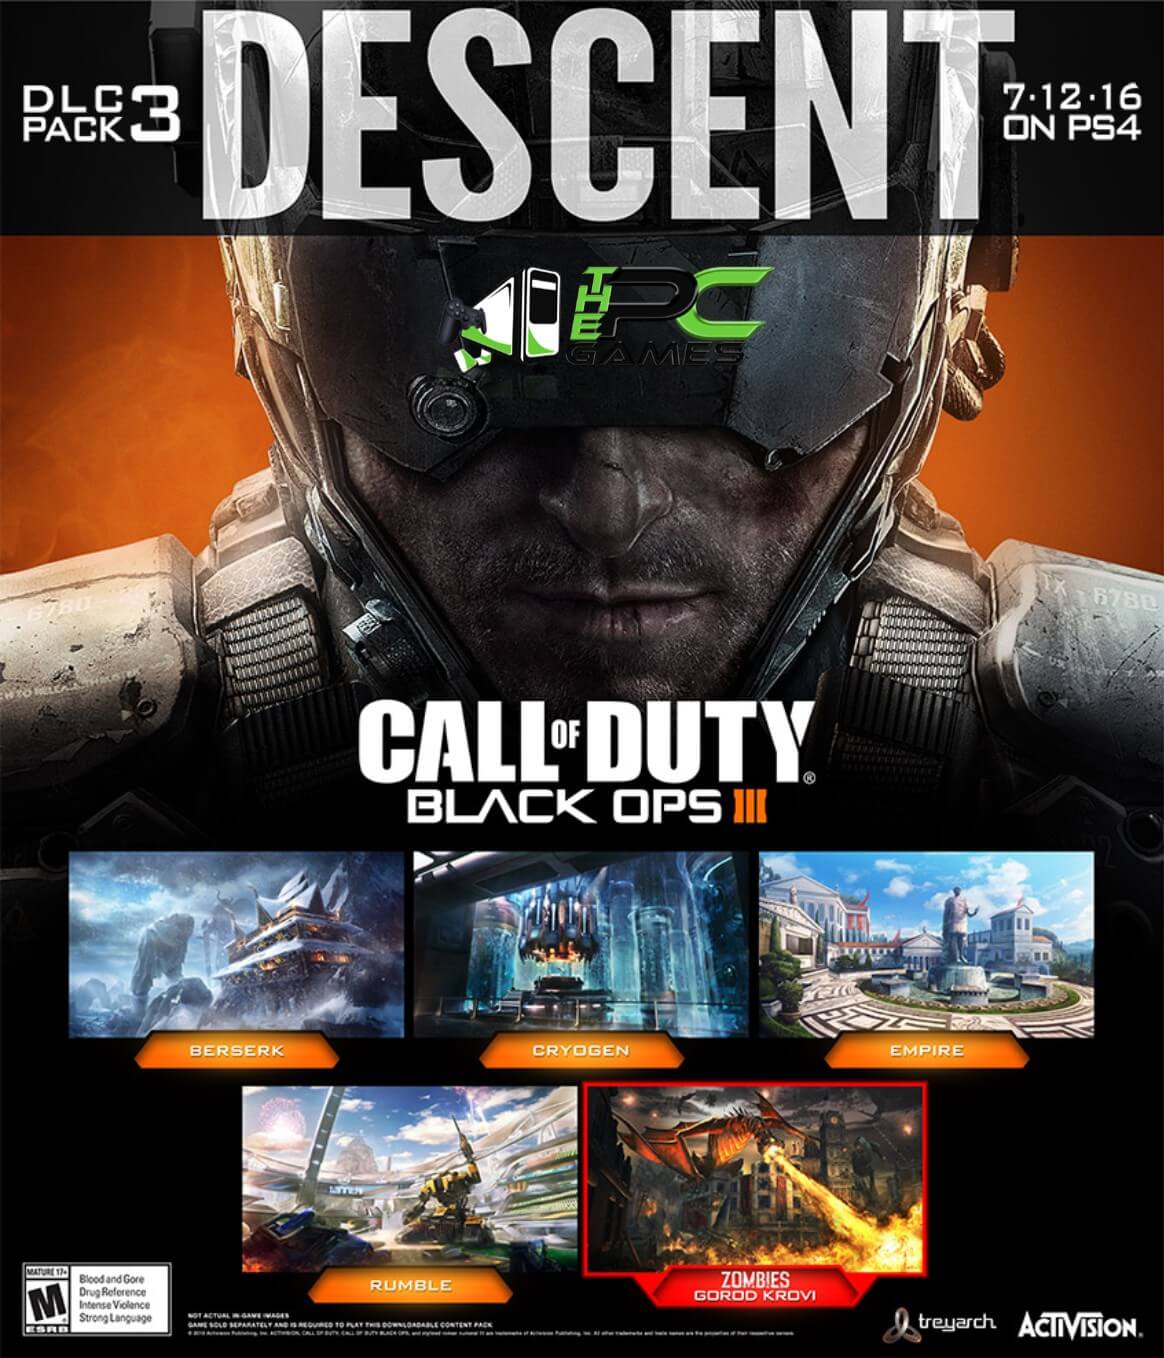 Call of duty black ops 3 download free laptop